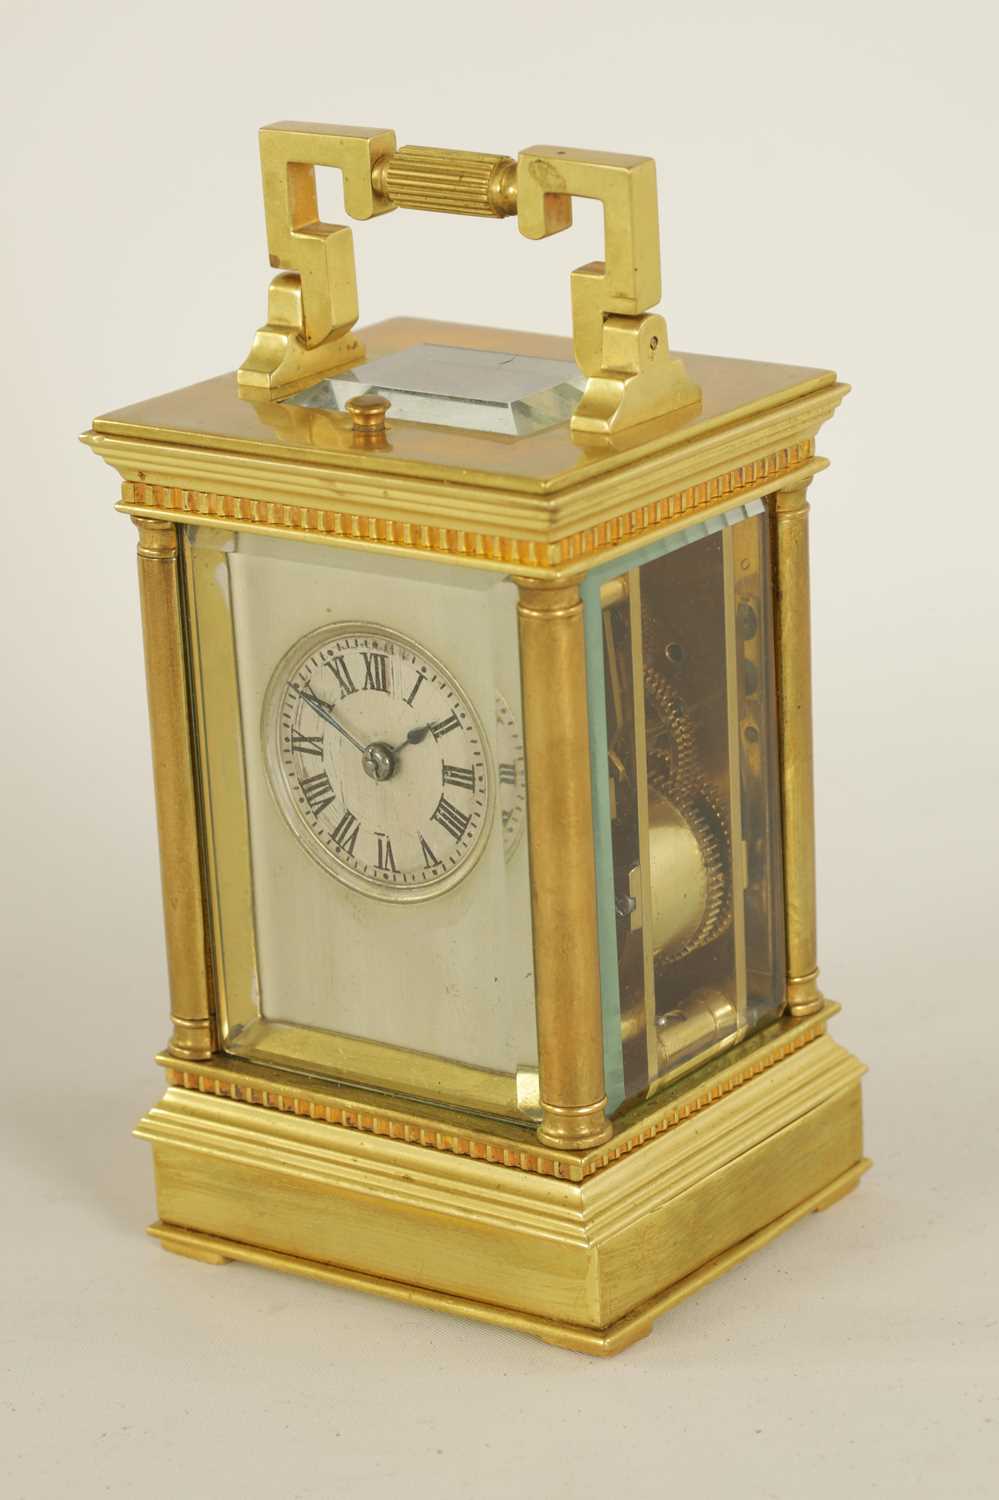 GAY AND LAMAILLE. A LATE 19TH CENTURY SMALL FRENCH REPEATING CARRIAGE CLOCK - Image 2 of 7